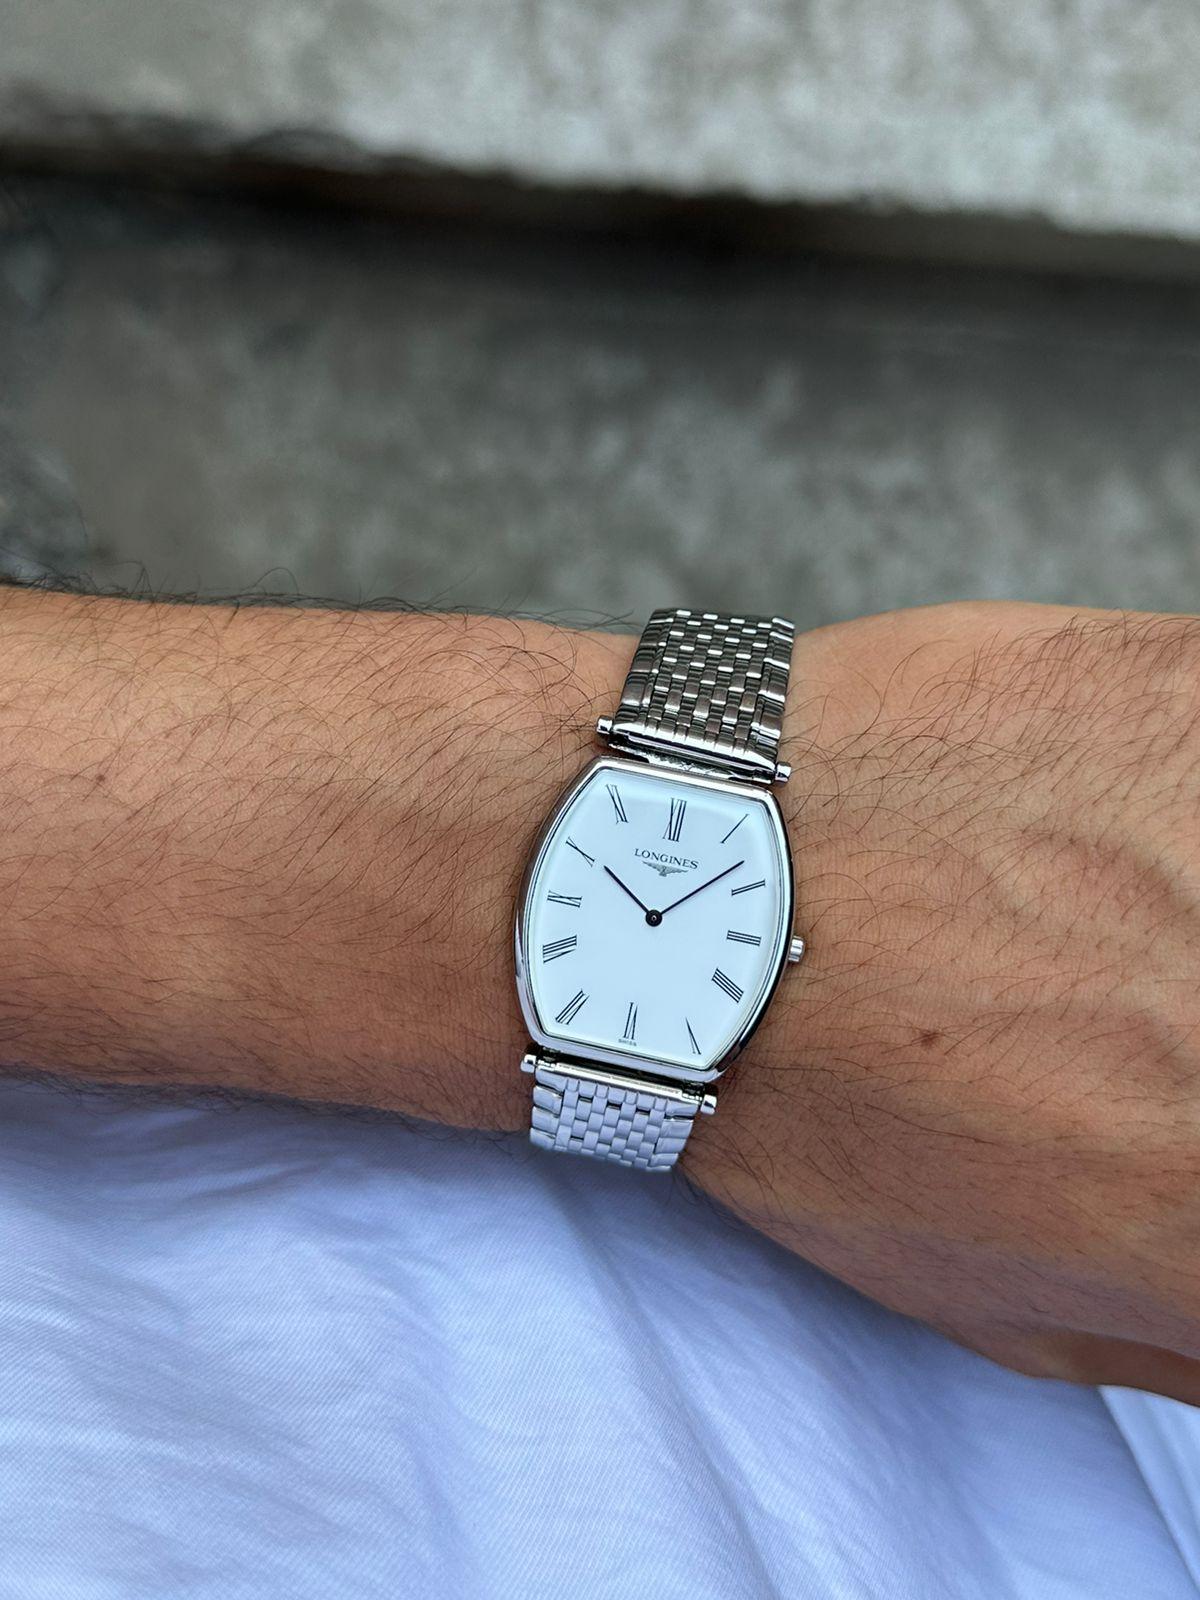 Brand: Longines

Model: La Grande Classique

Reference Number: L47054

Country Of Manufacture: Switzerland

Movement: Quartz

Case Material: Stainless steel

Measurements : 29 mm x38.5 mm (without crown)

Band Type : Stainless steel

Band Condition